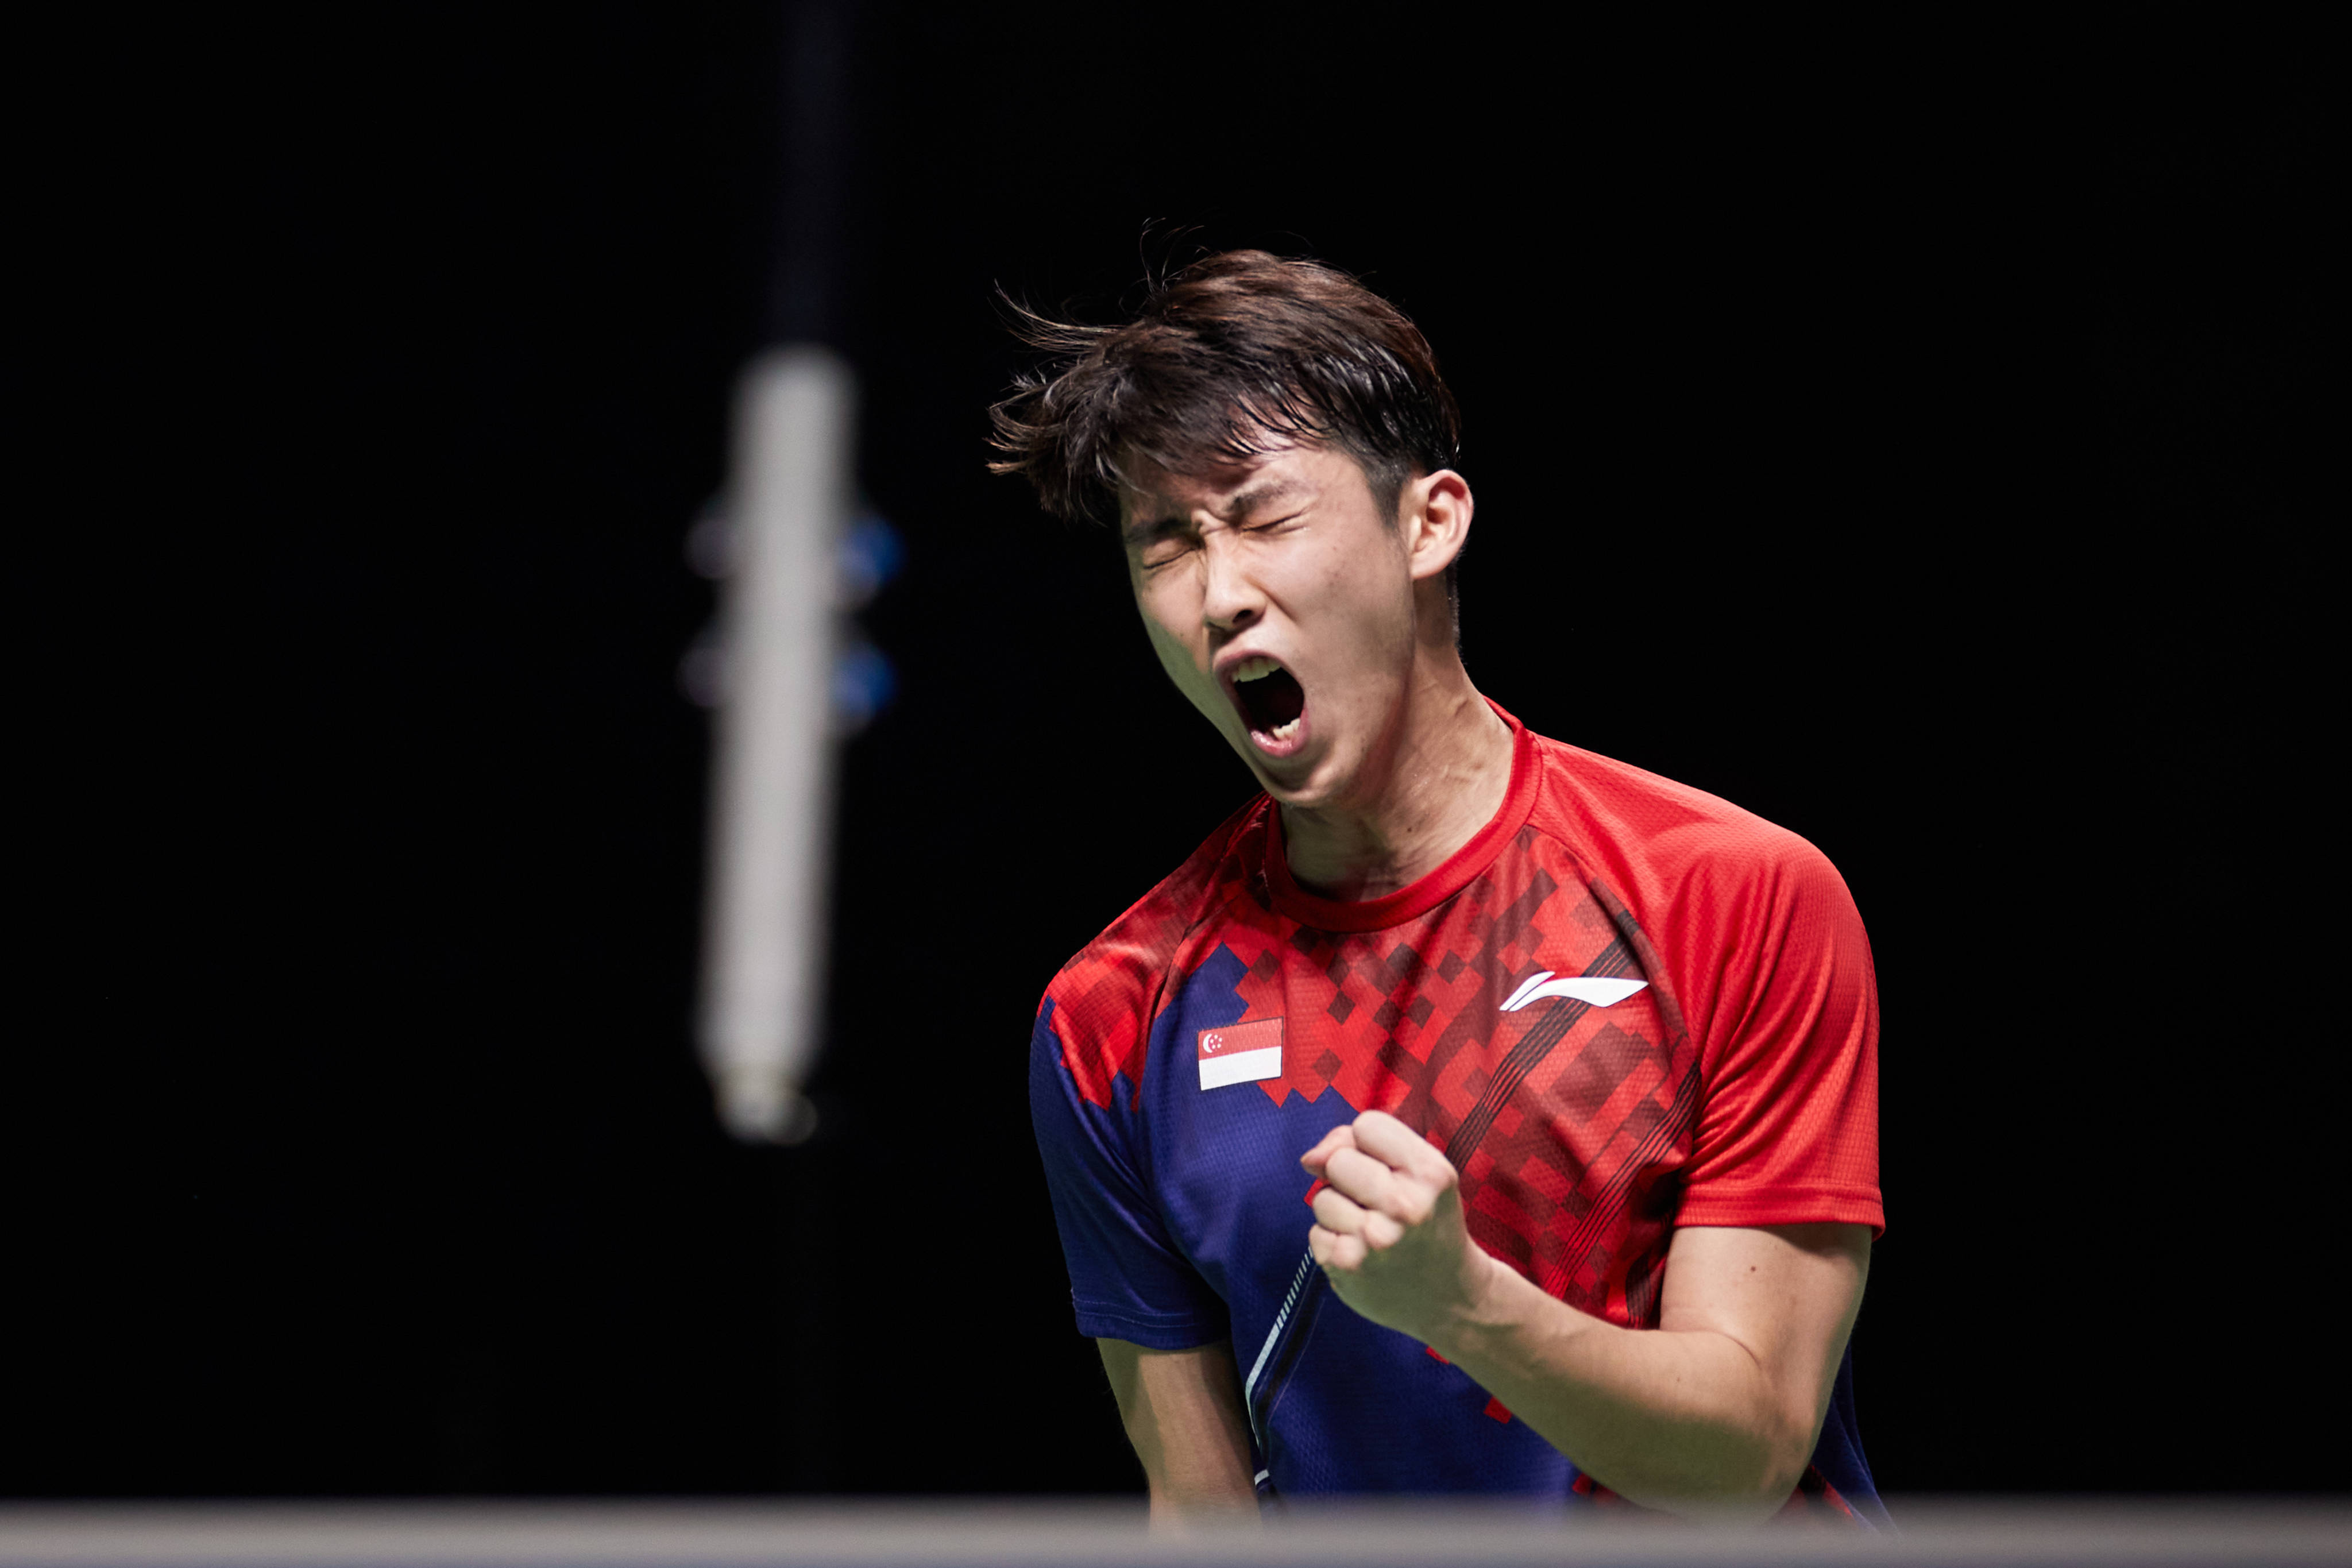 Loh Kean Yew of Singapore celebrates scoring a point during the men’s singles final at the BWF World Championships 2021 in Huelva, Spain. Photo: Xinhua